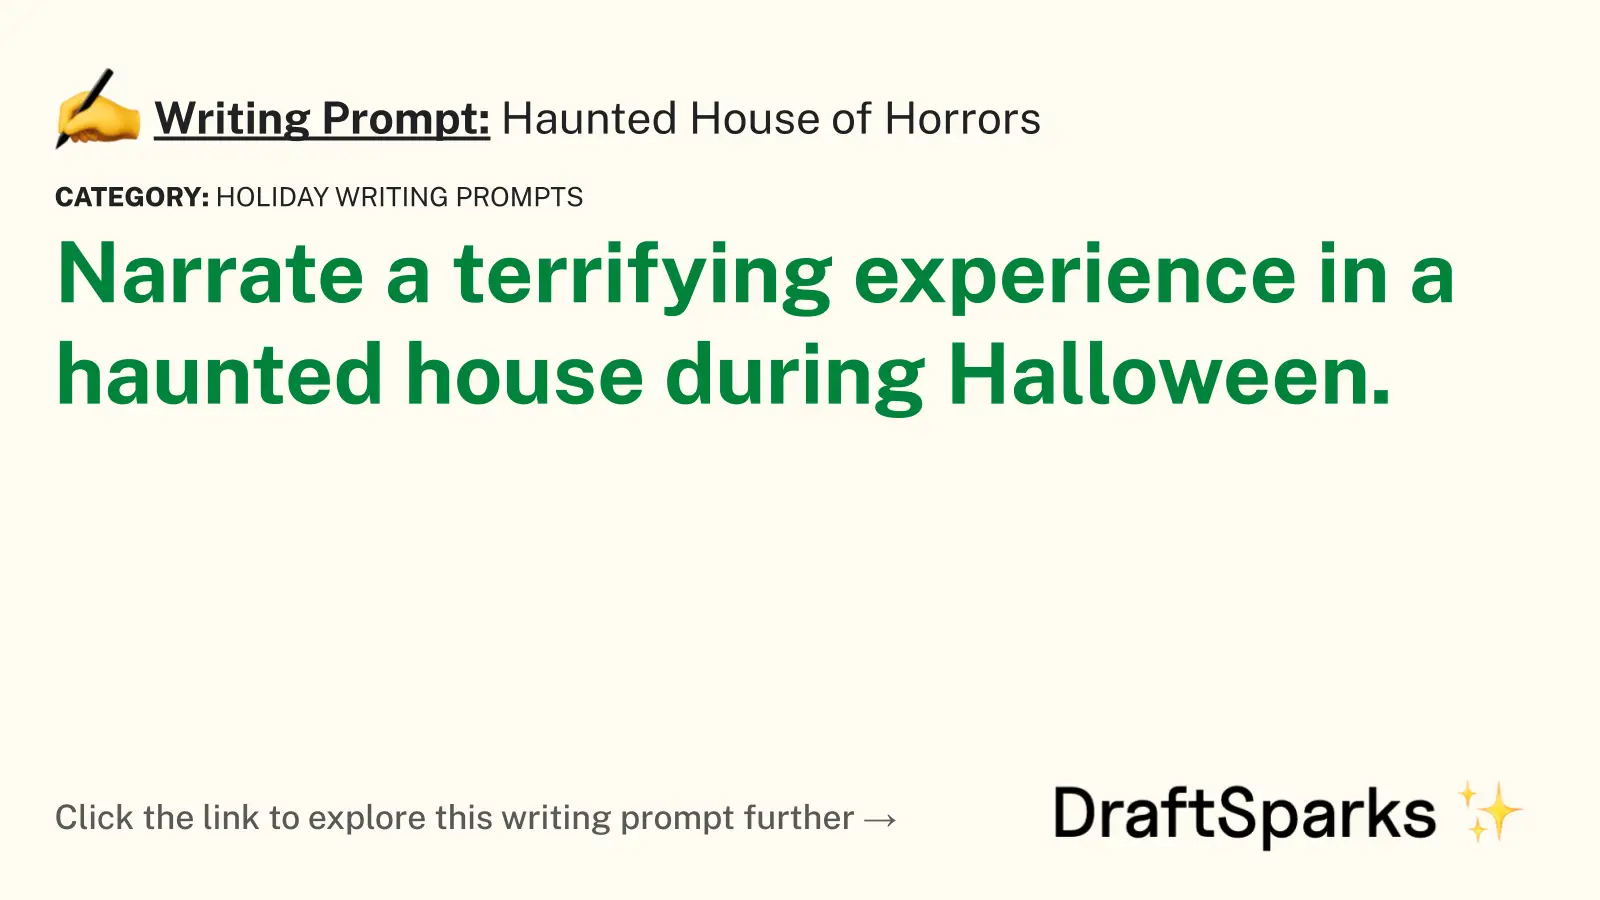 Haunted House of Horrors